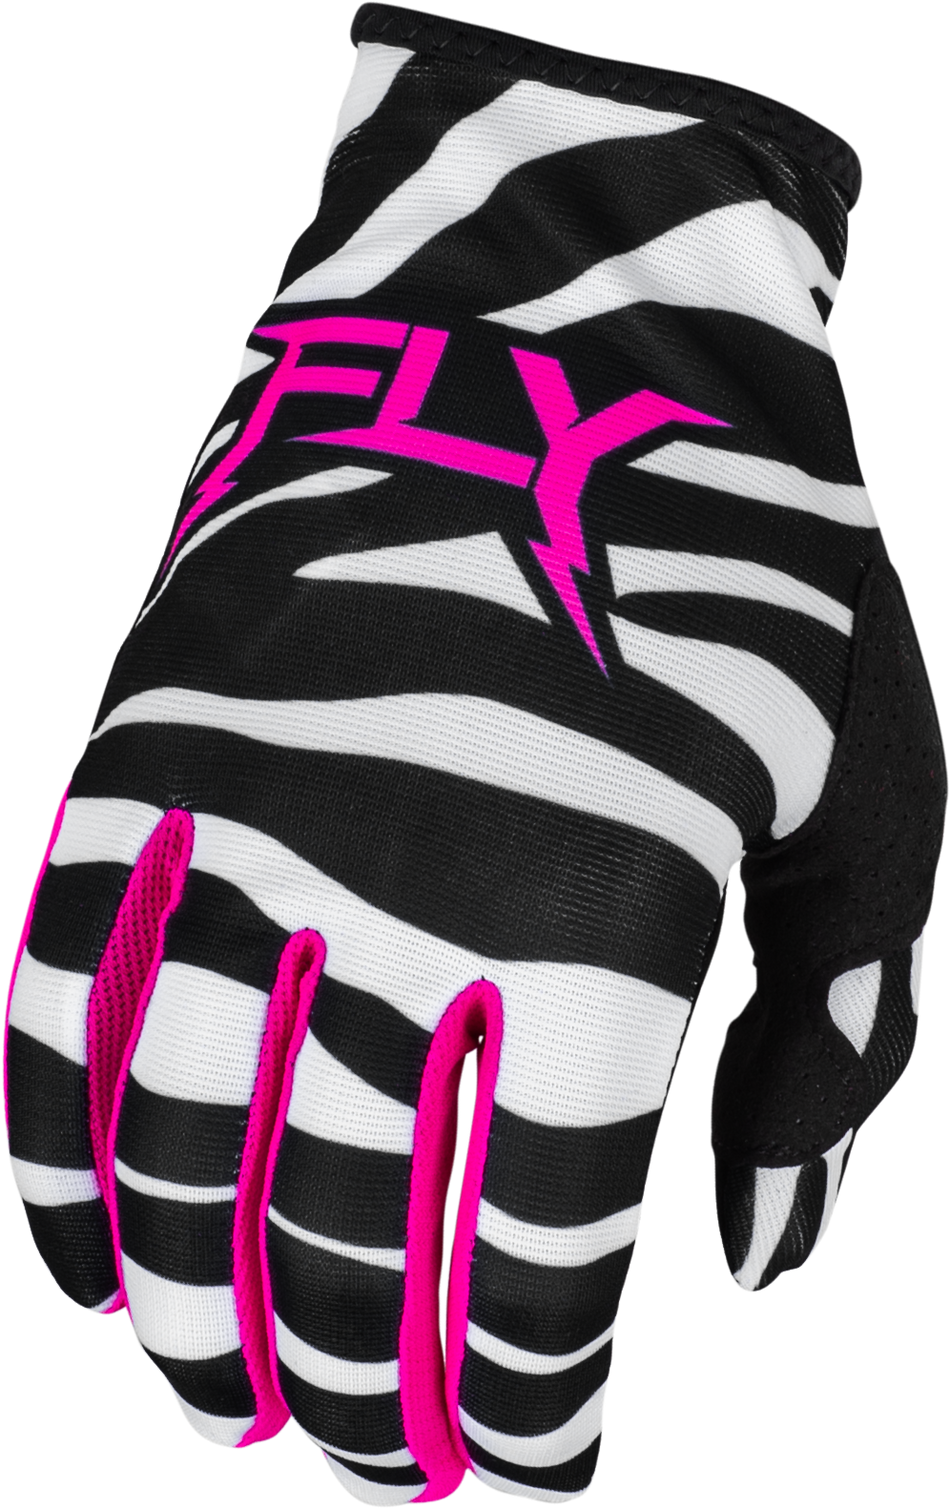 FLY RACING Lite Uncaged Gloves Black/White/Neon Pink Lg 377-741L